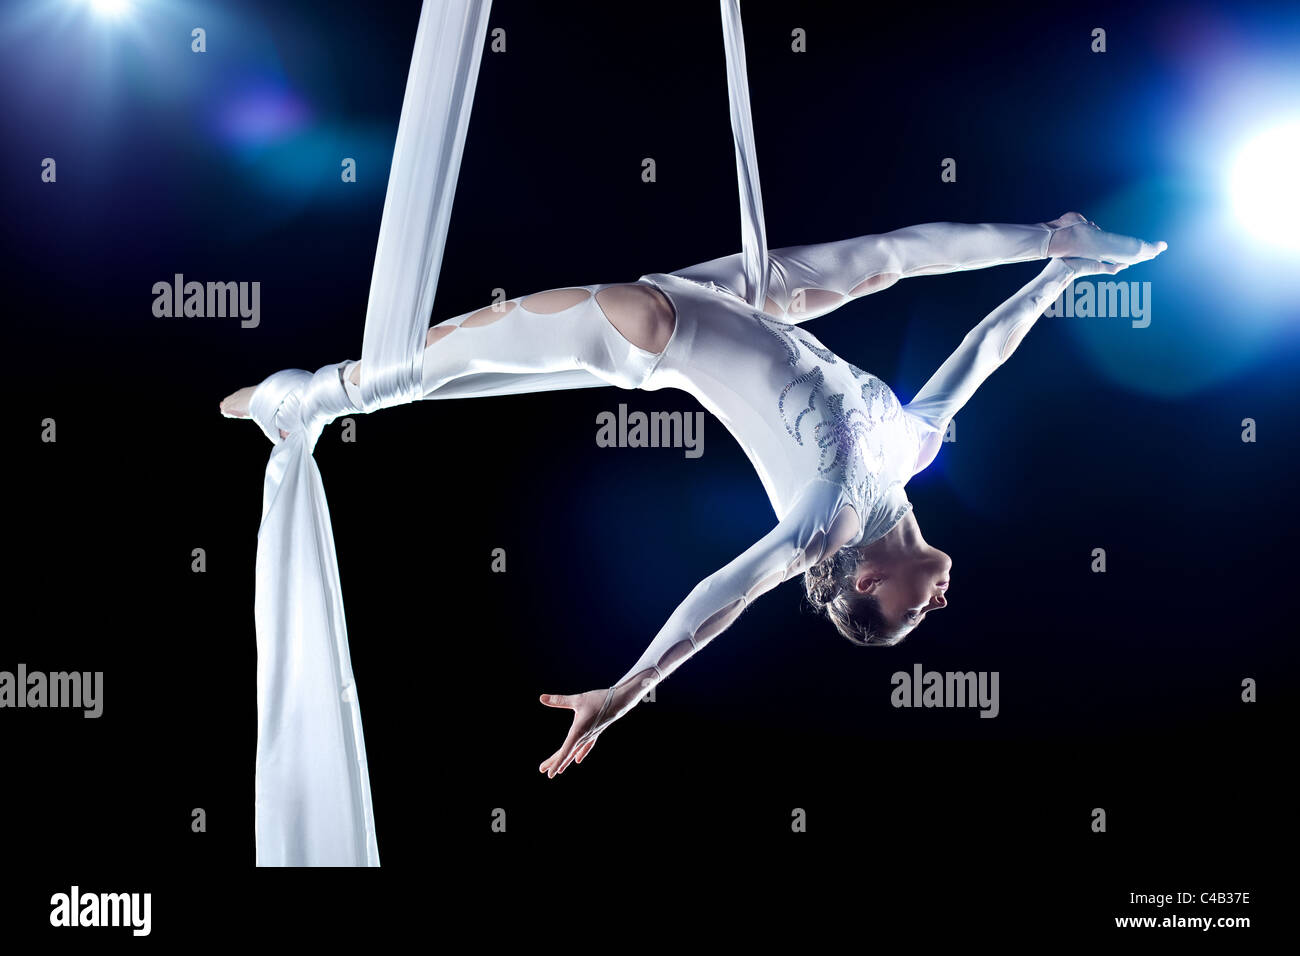 Young woman gymnast. On black background with flash effect. Stock Photo